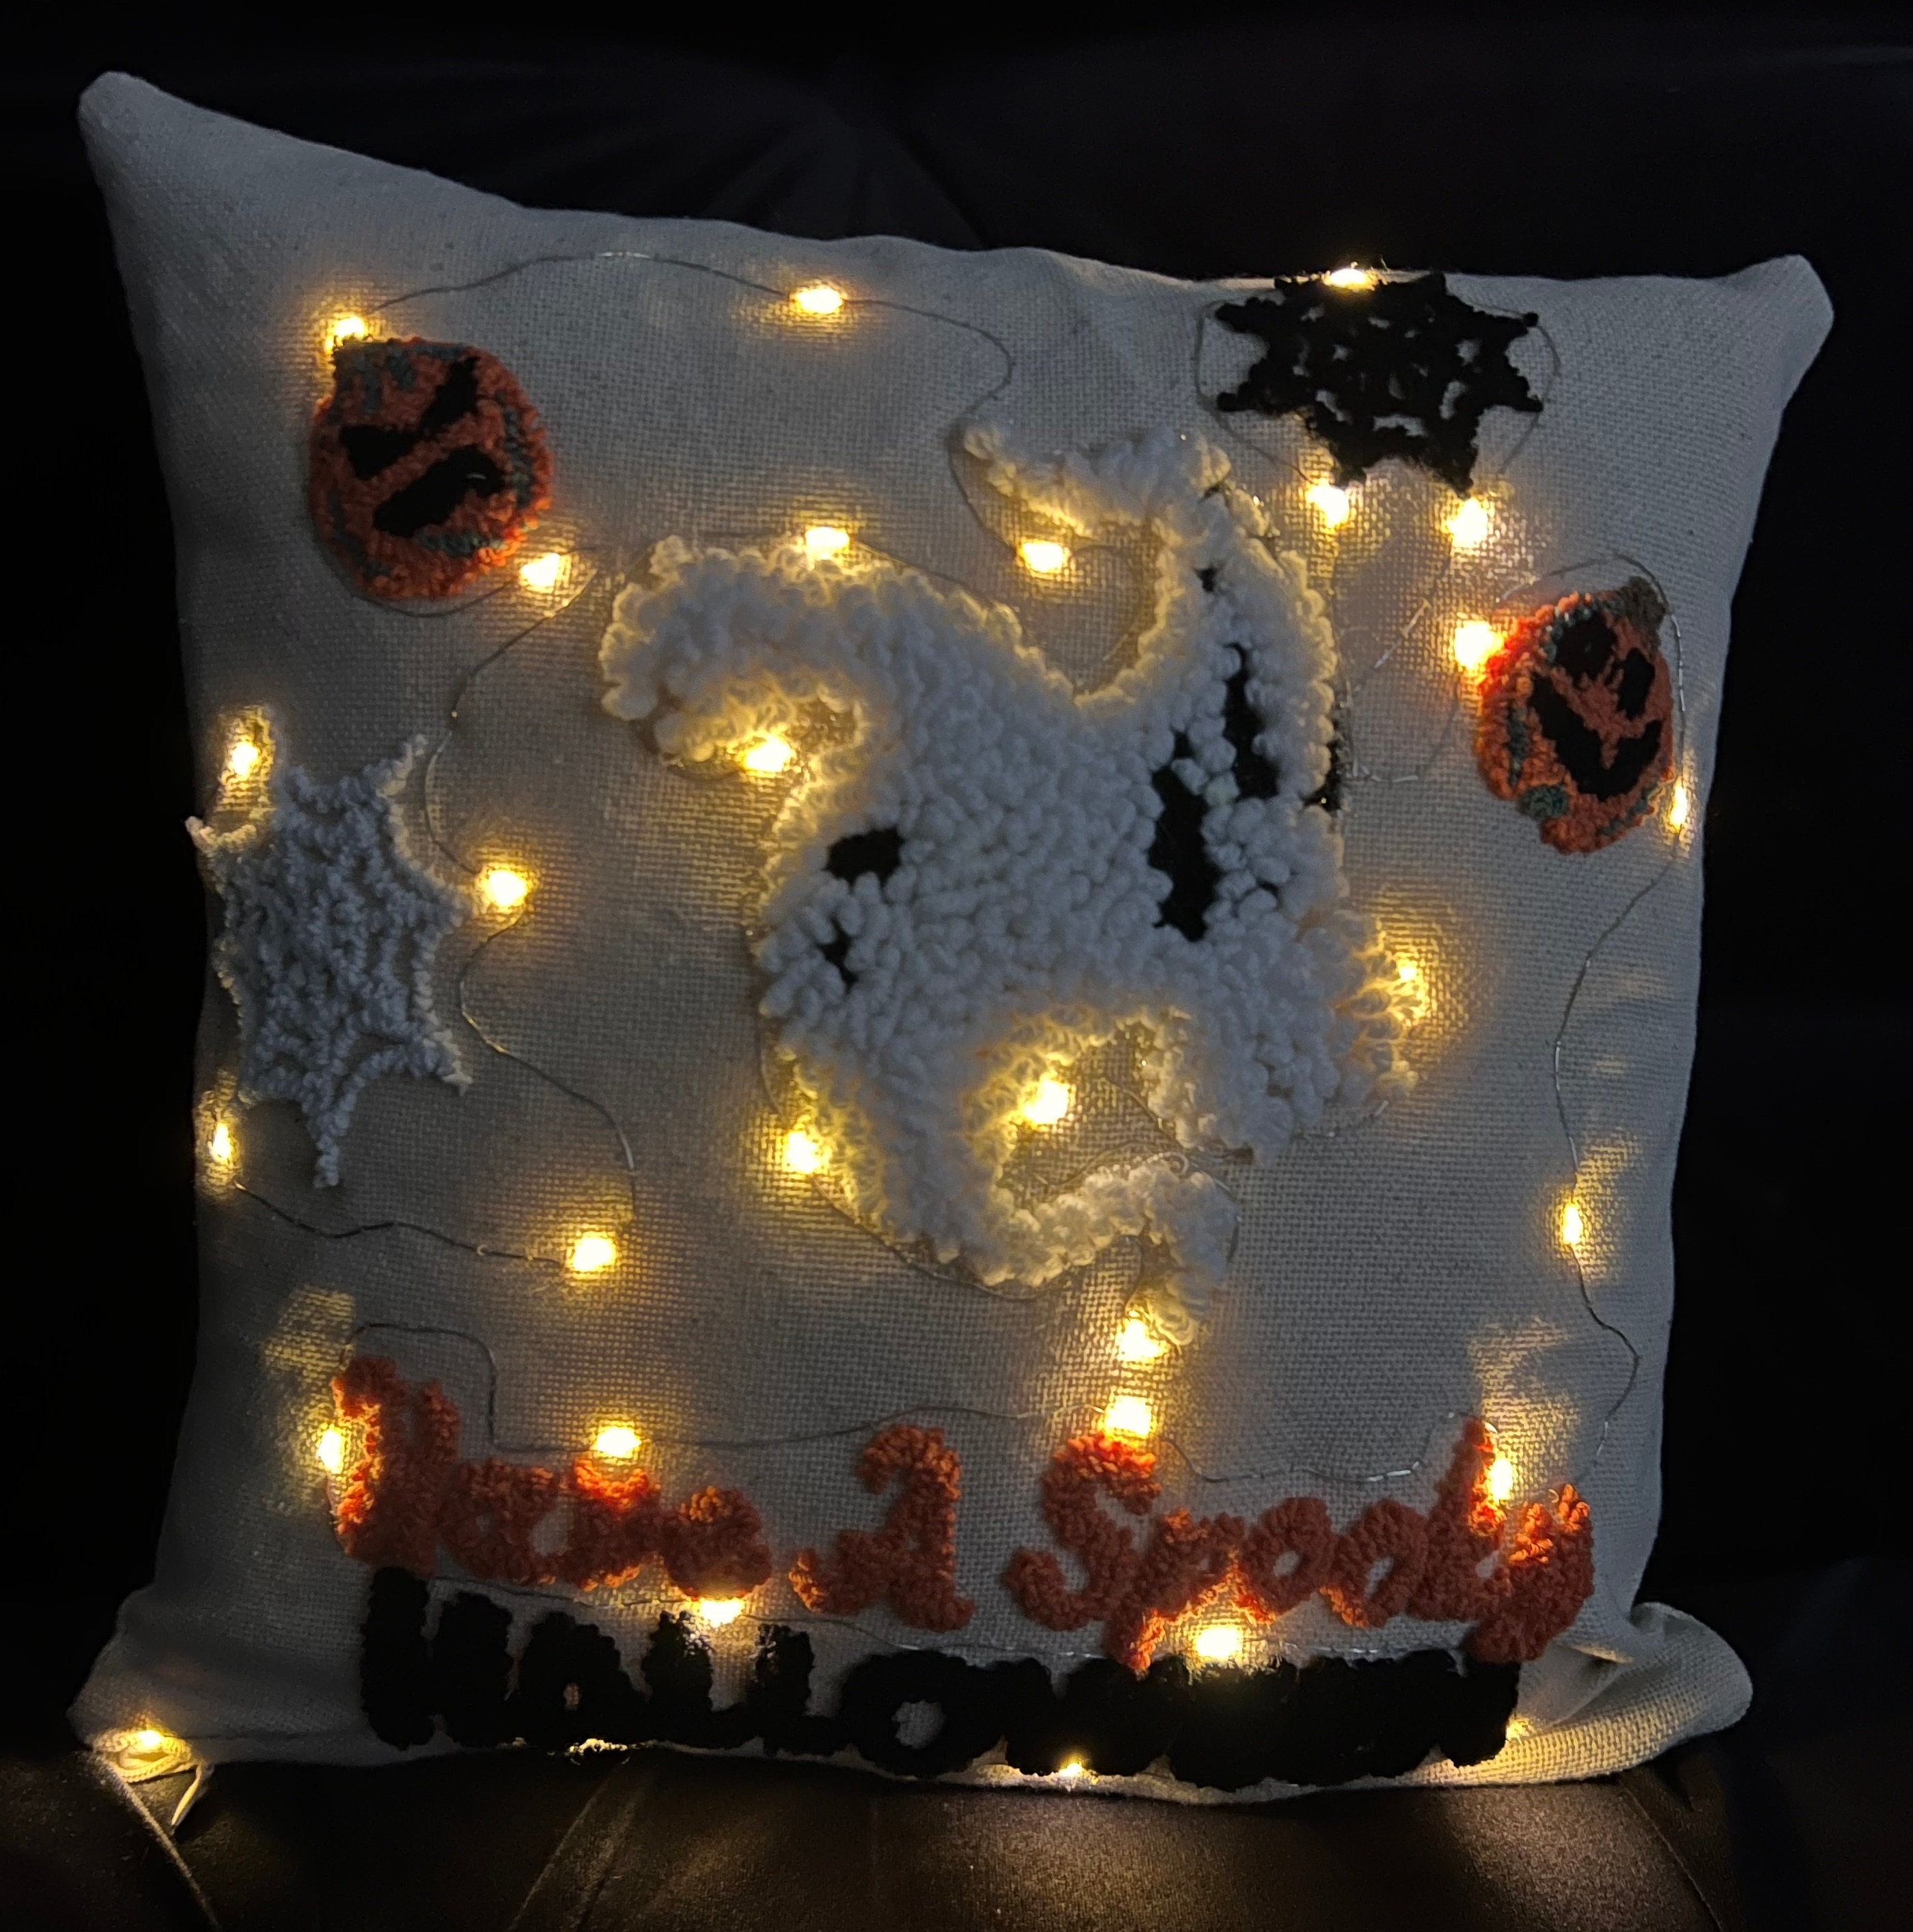 Hand Tufted Halloween Pillow Cover,ghosts Embroidered Cushion